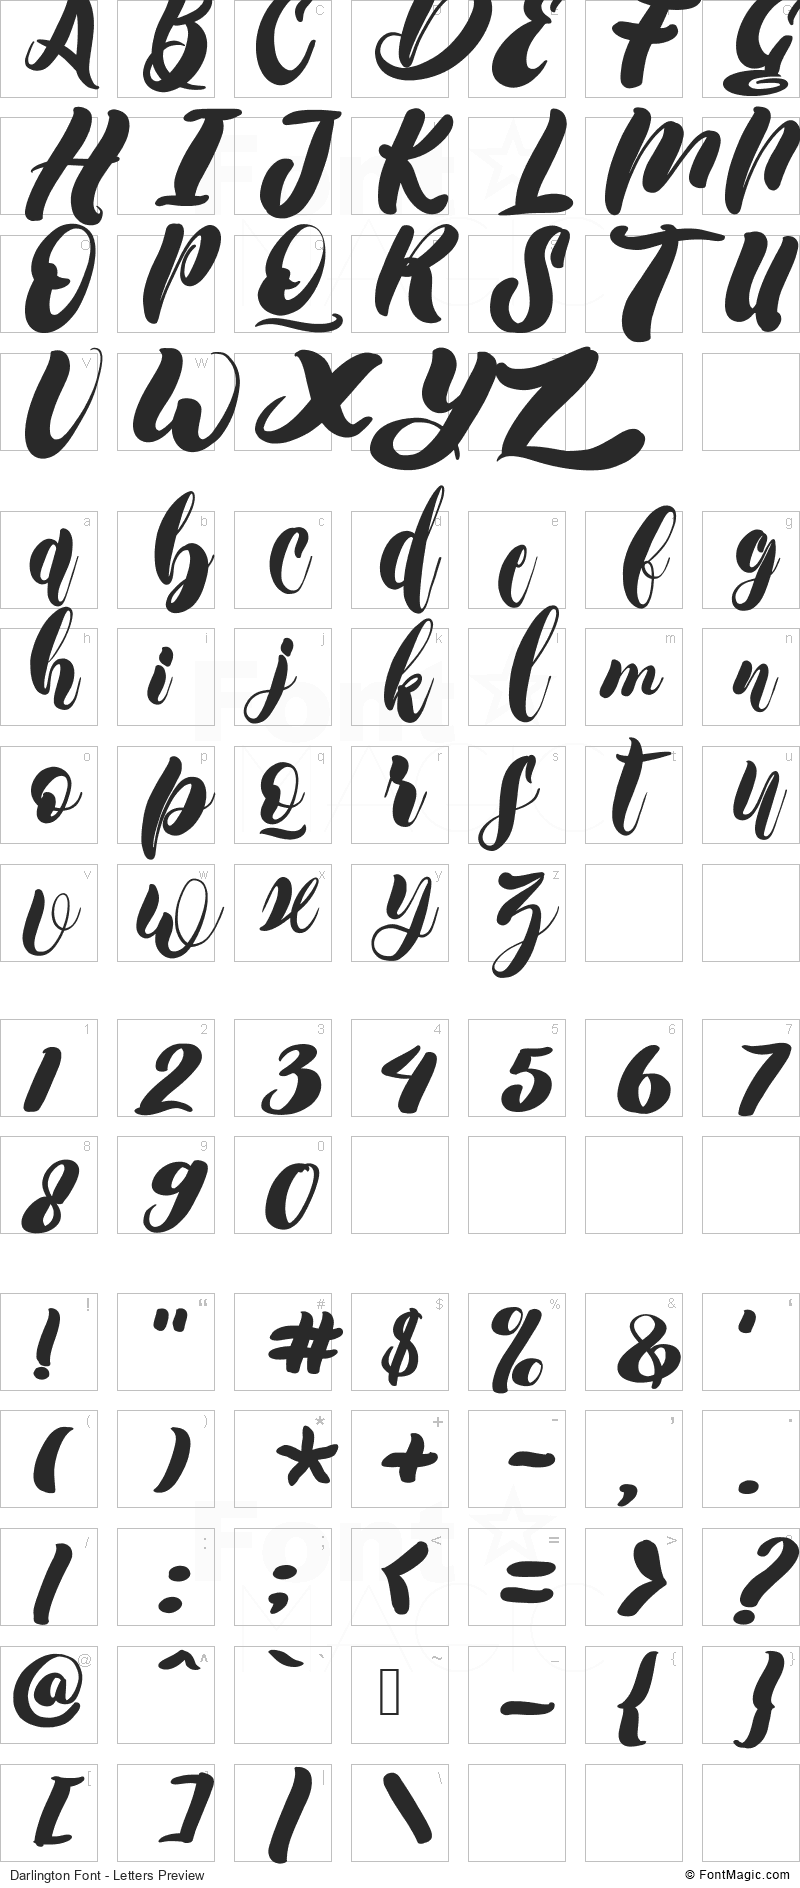 Darlington Font - All Latters Preview Chart